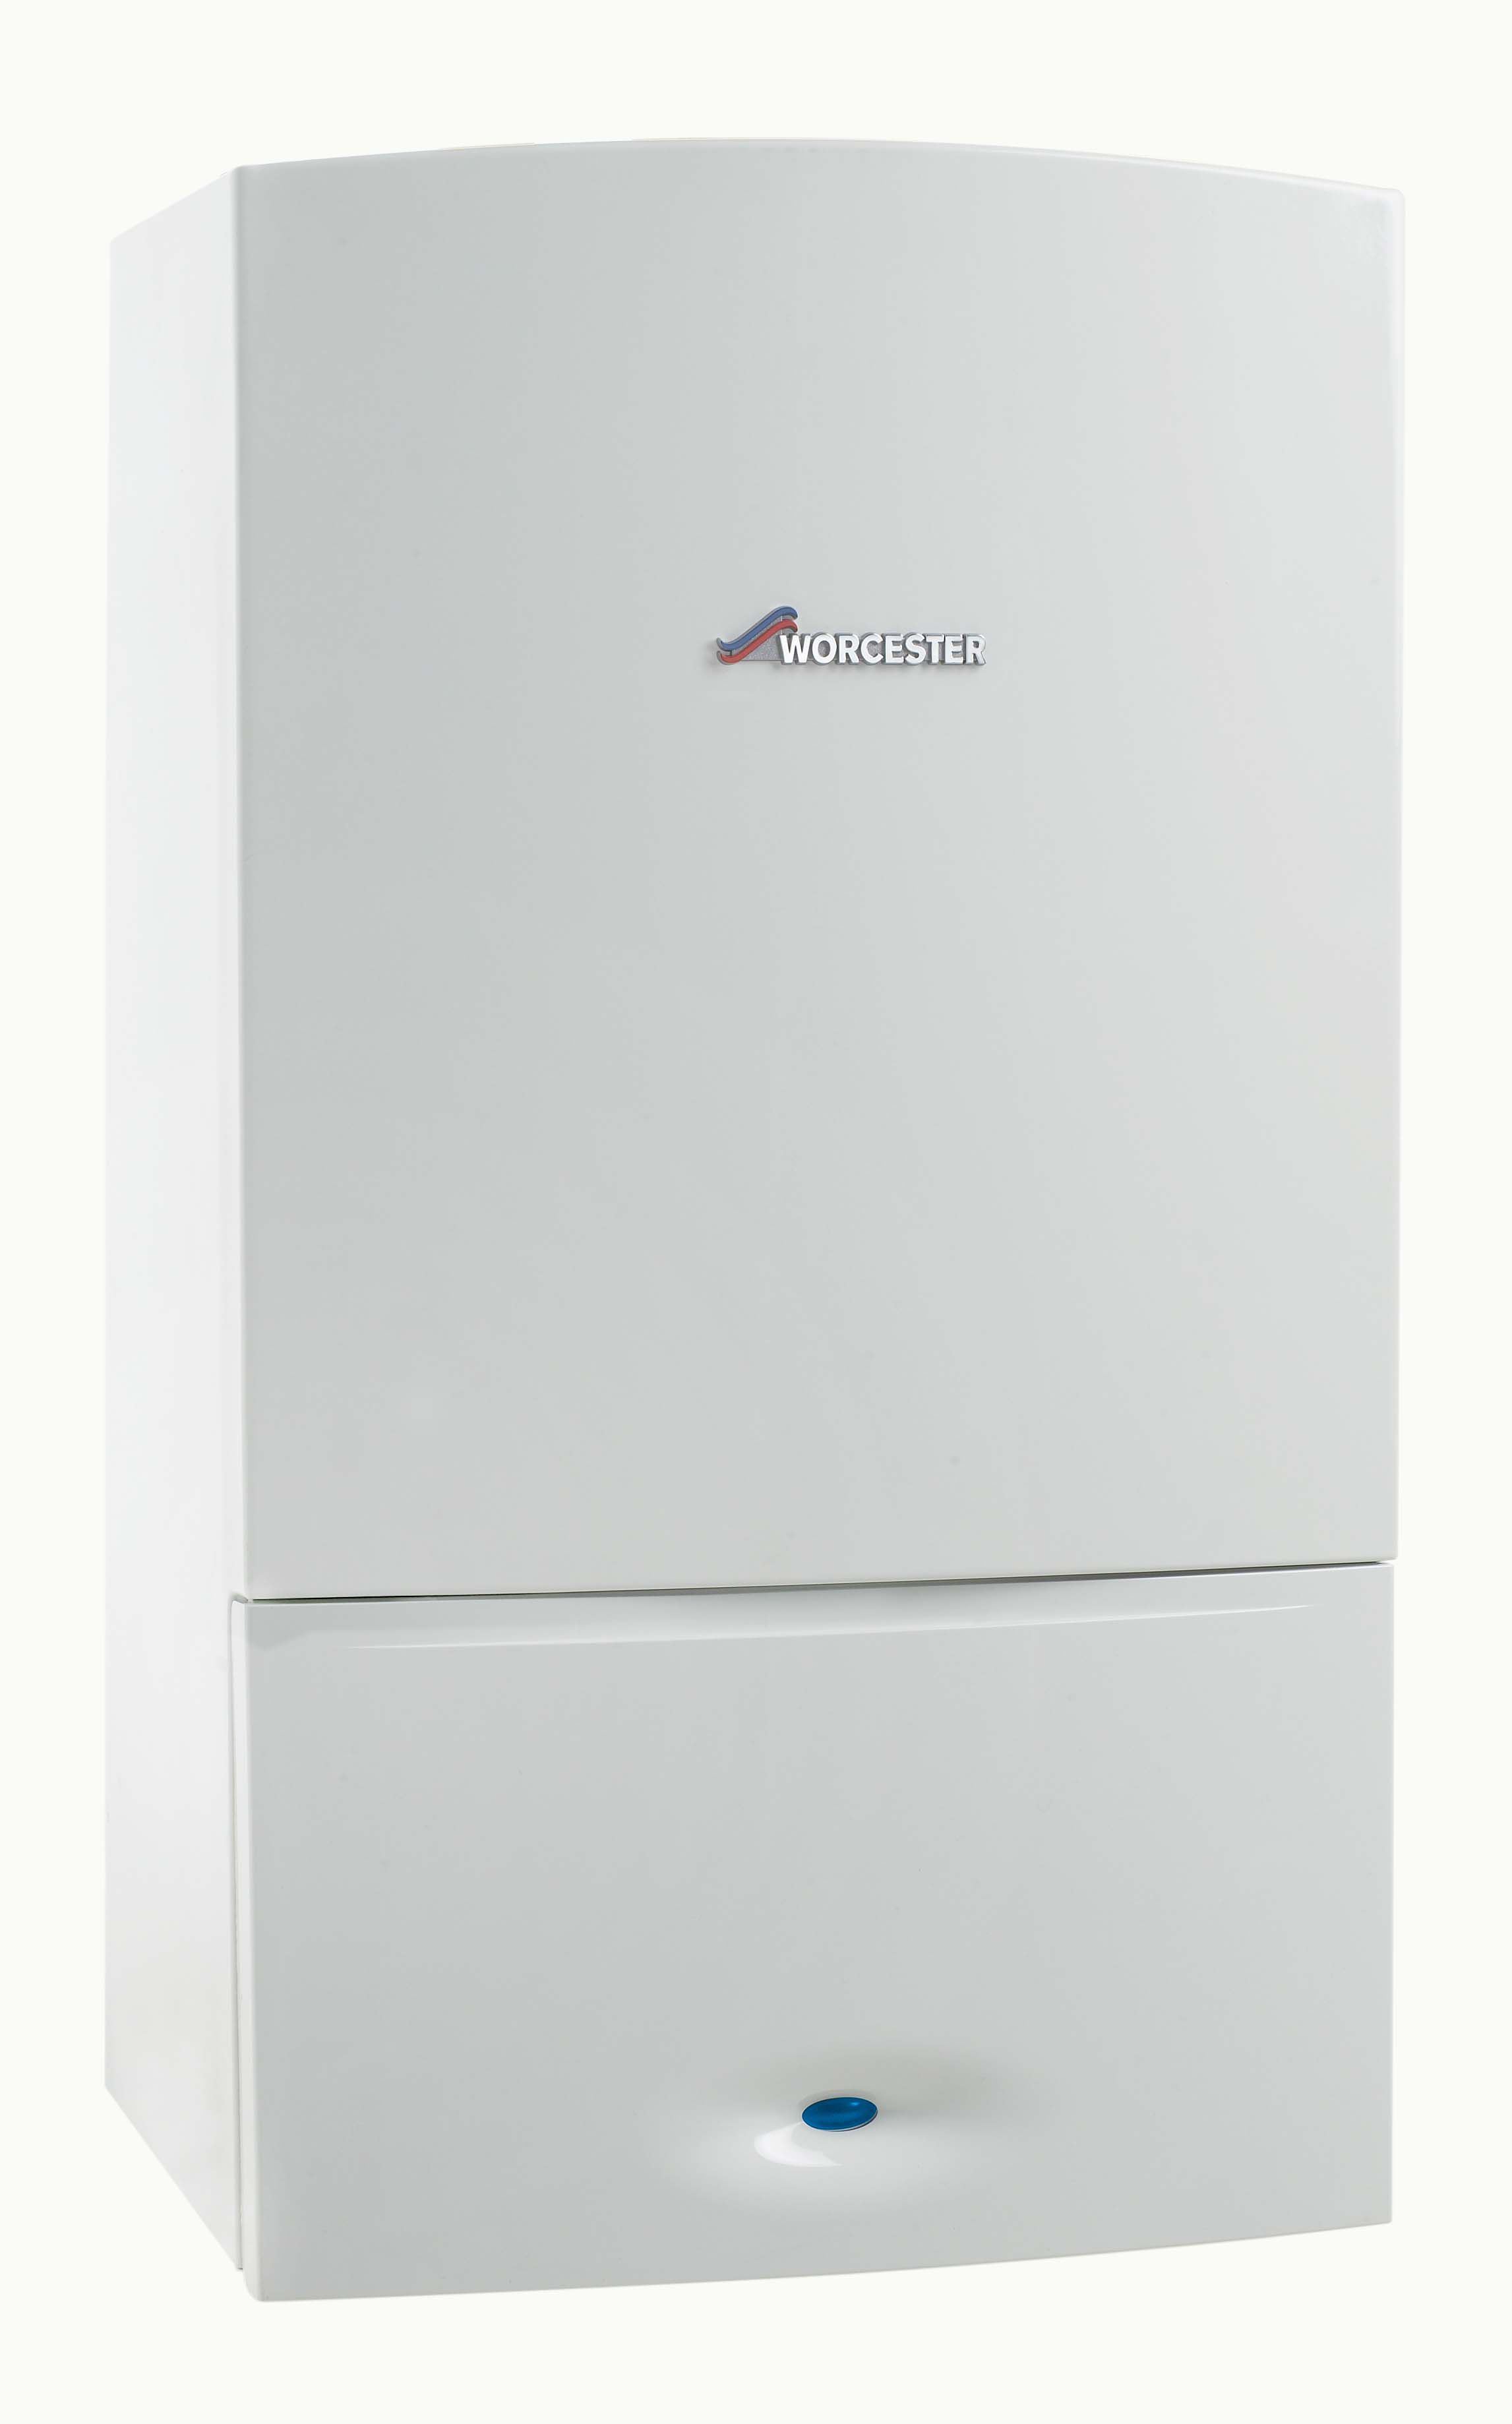 Image of Worcester Bosch Greenstar 32CDI Compact Natural Gas Combi Boiler - 32kW